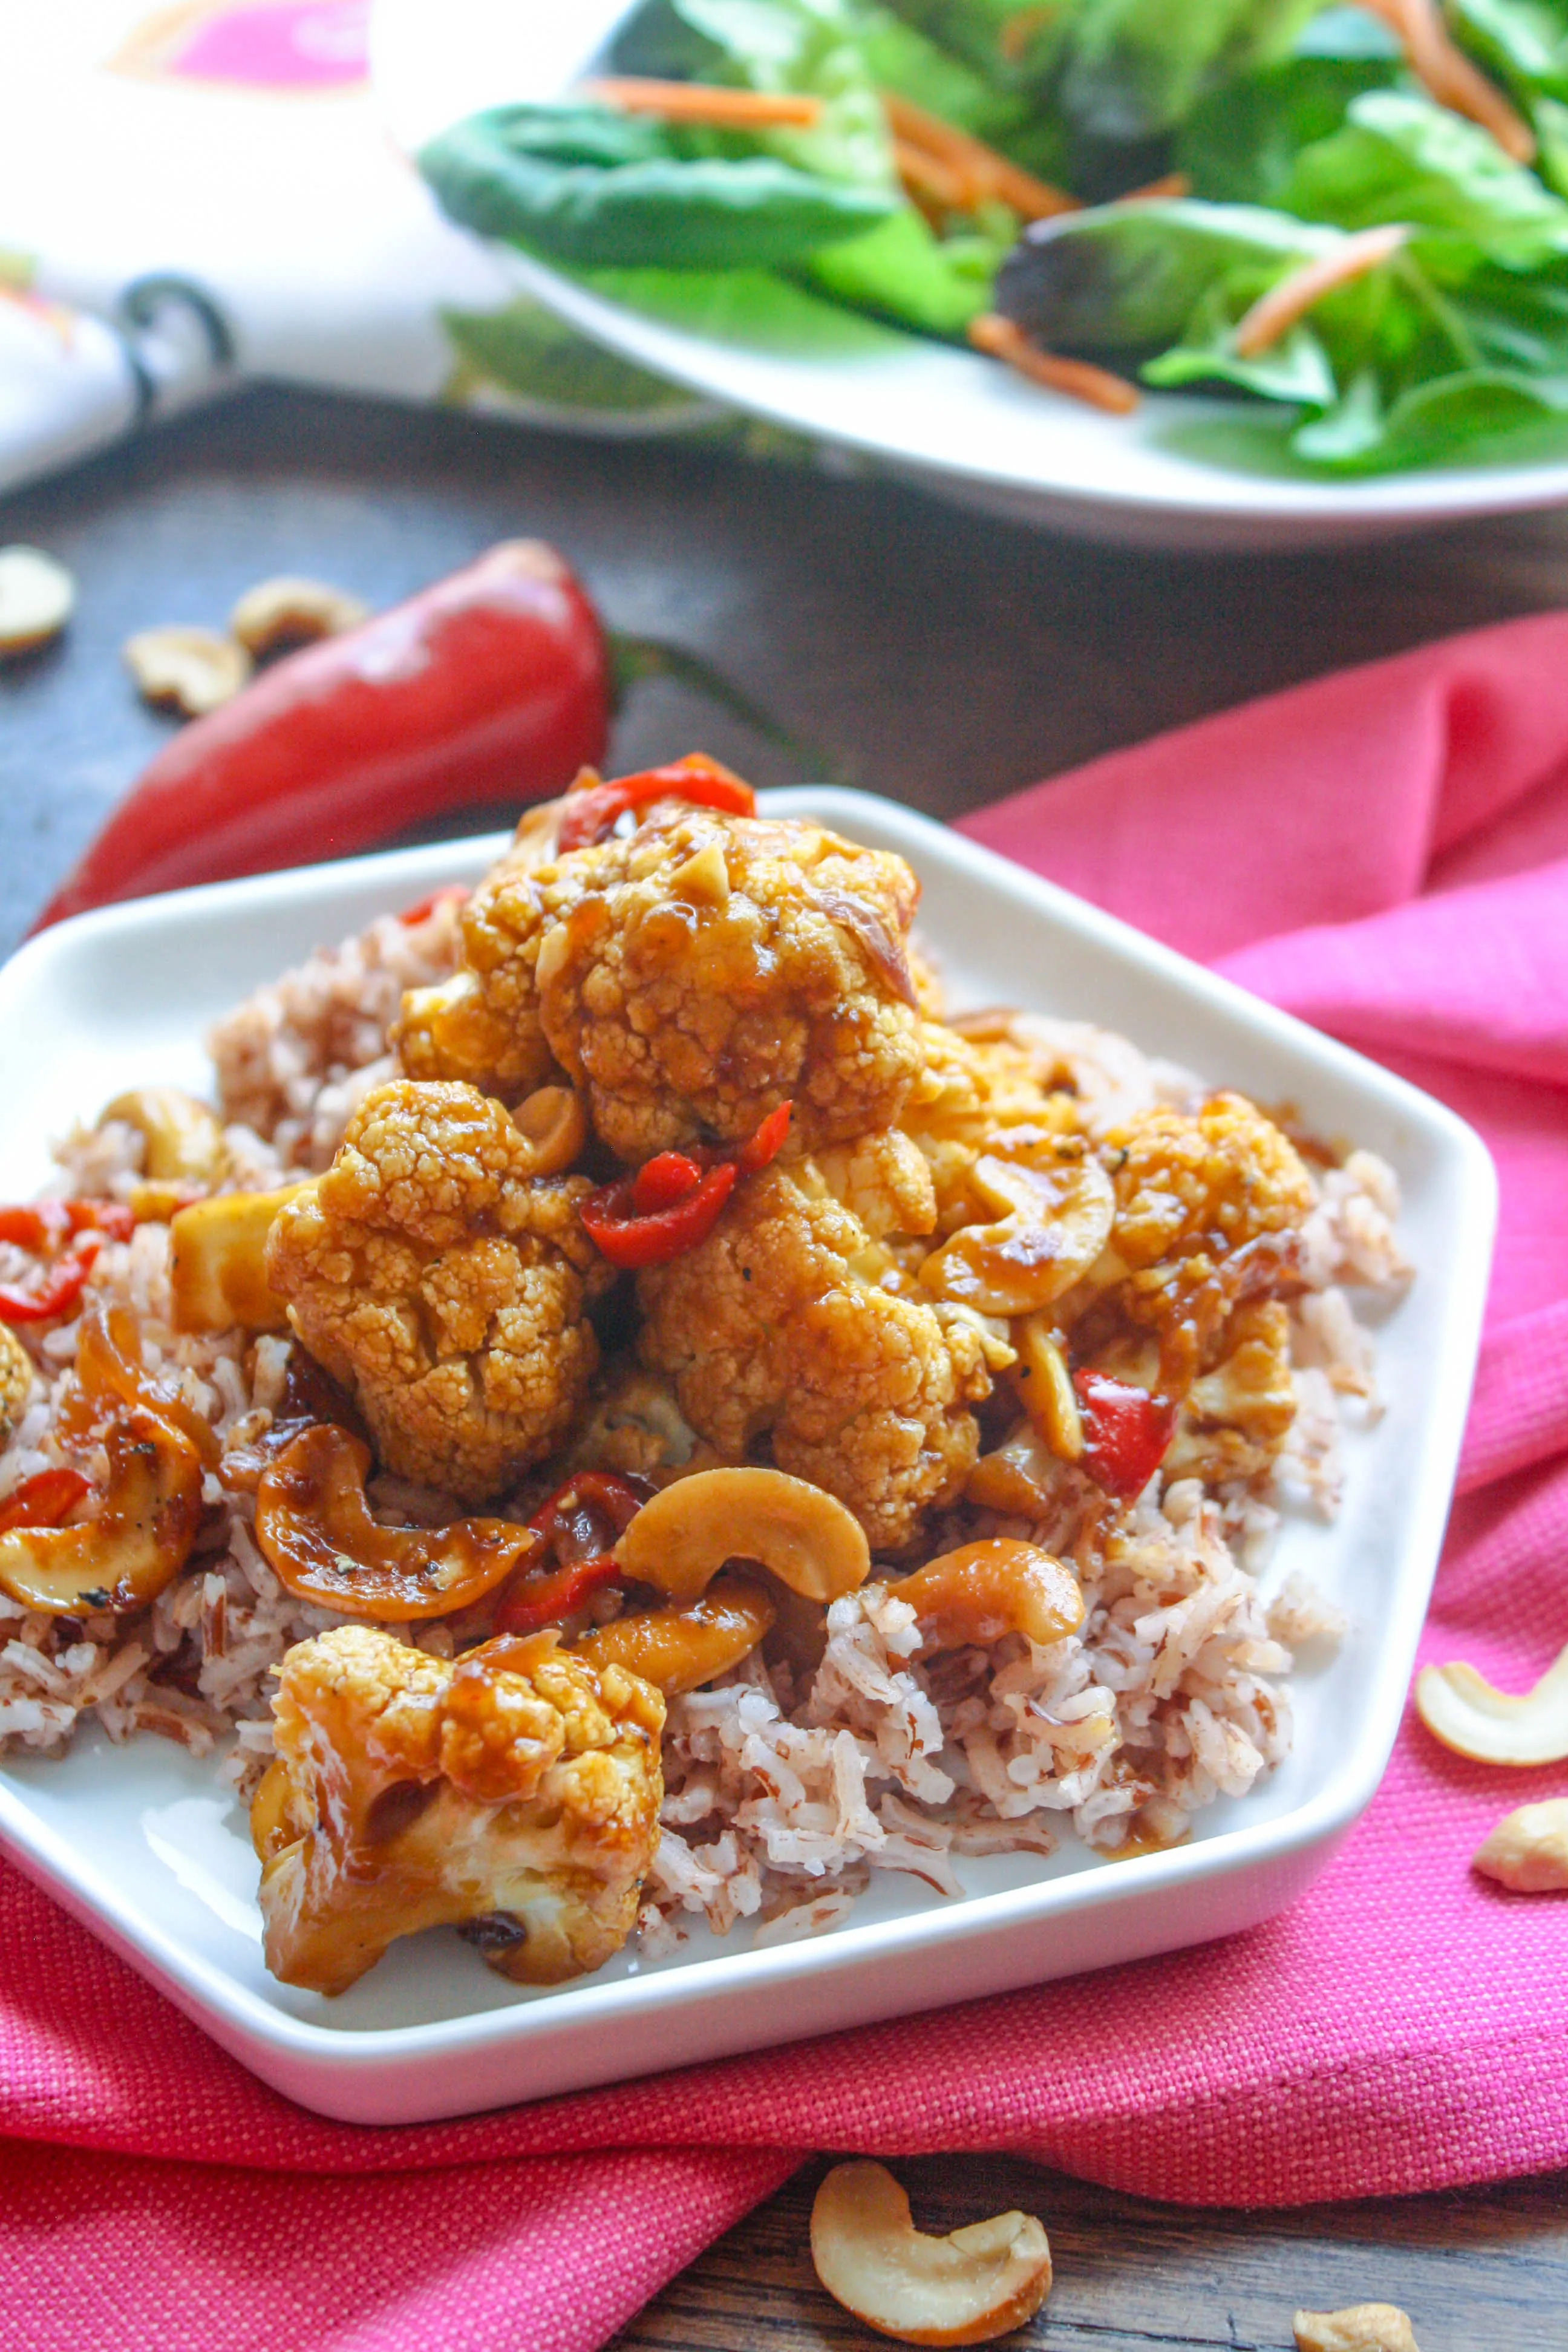 Kung Pao Cauliflower is a tasty, meatless dish. Serve it as an appetizer or as a main dish - you decide!